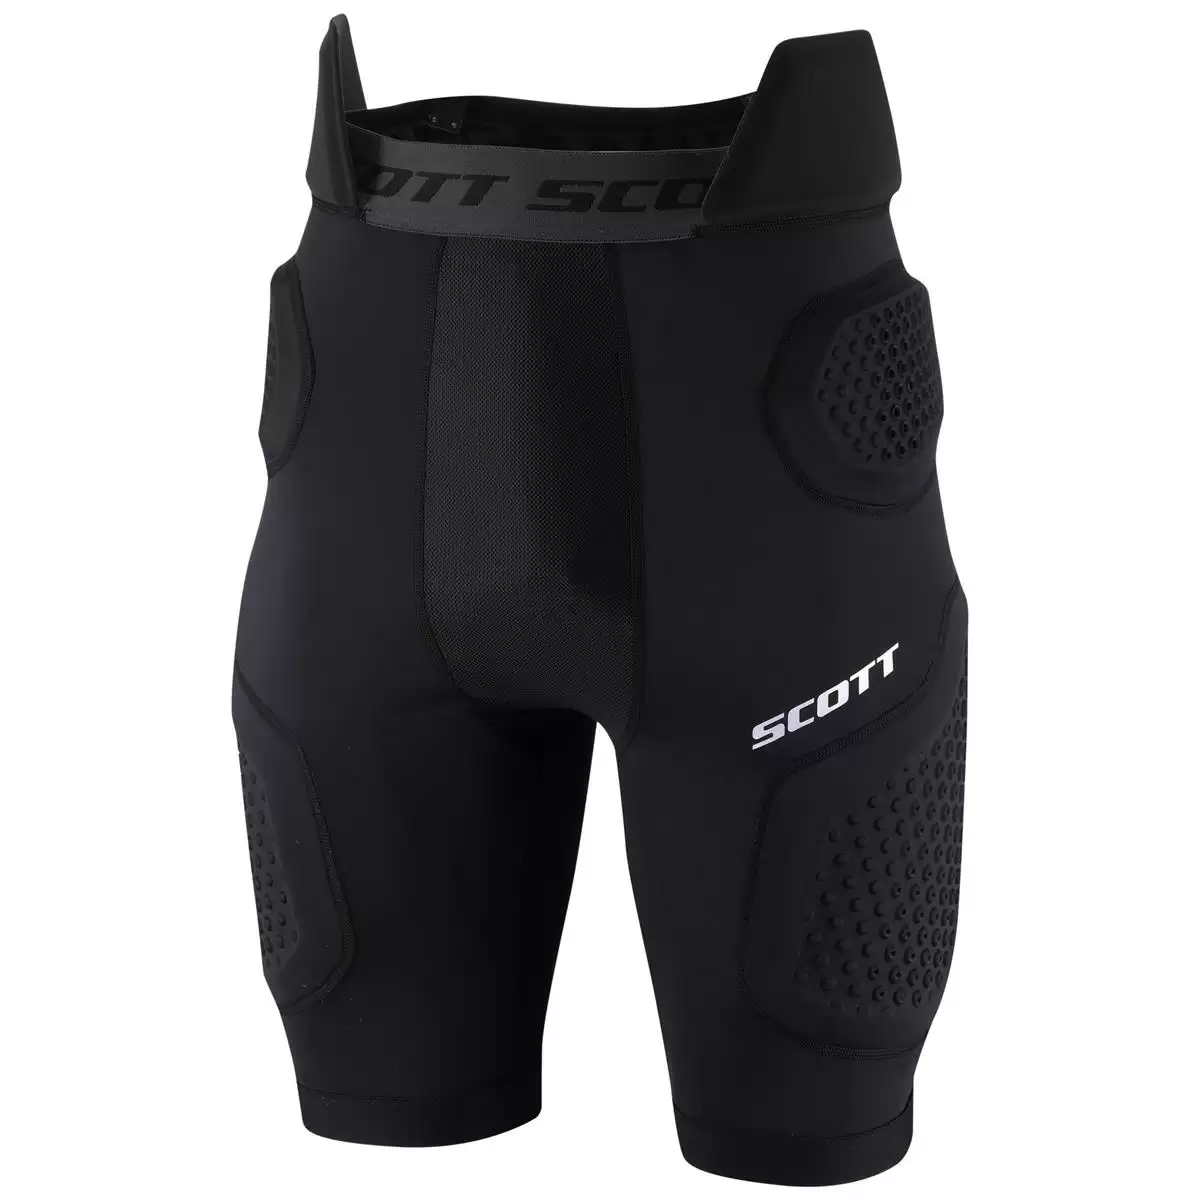 Short protector Softcon air black - Size S - image